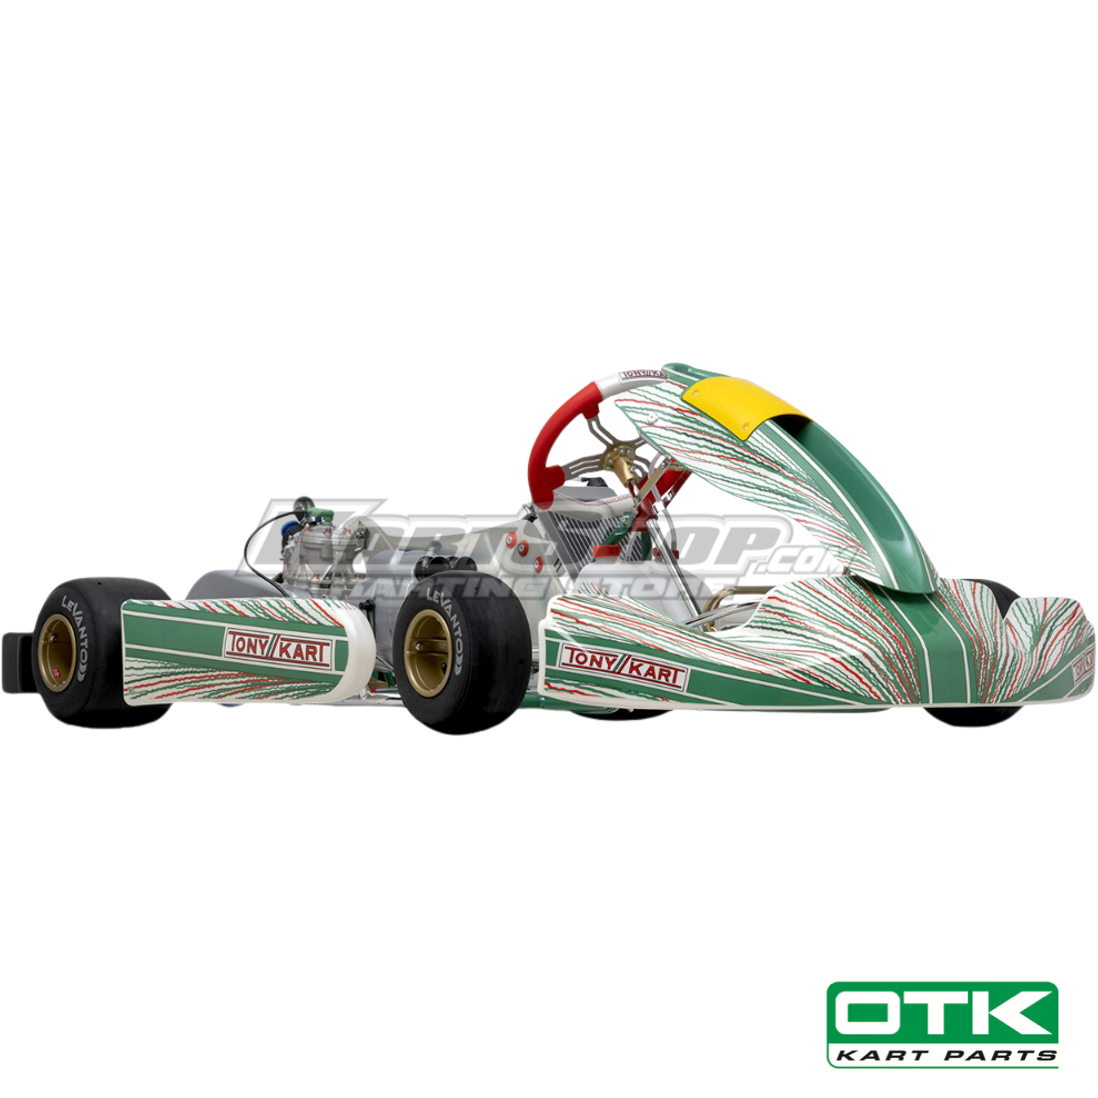 tony kart racer 401R with all new parts and new bodywork